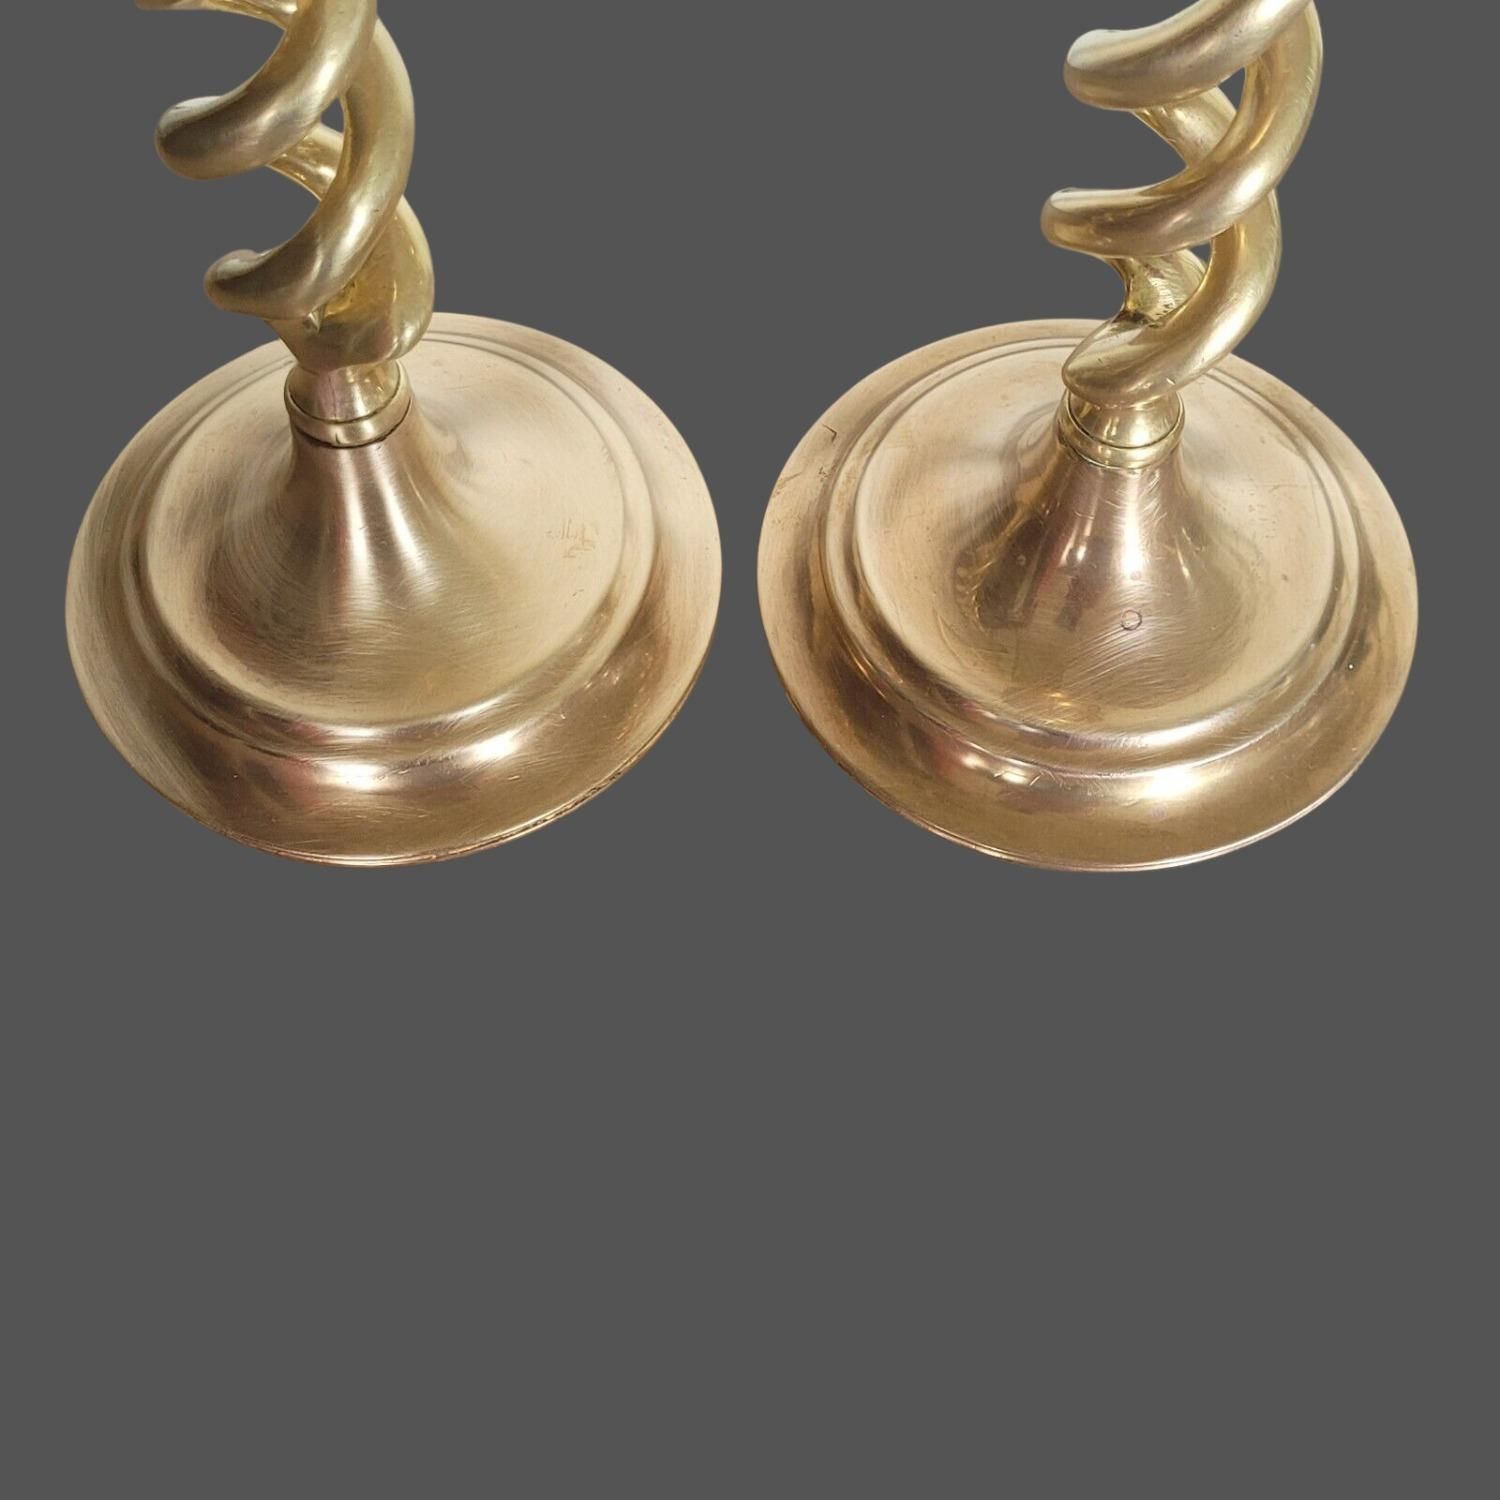 Two Pairs of Barley Twist Candlesticks – Boyd's Antiques